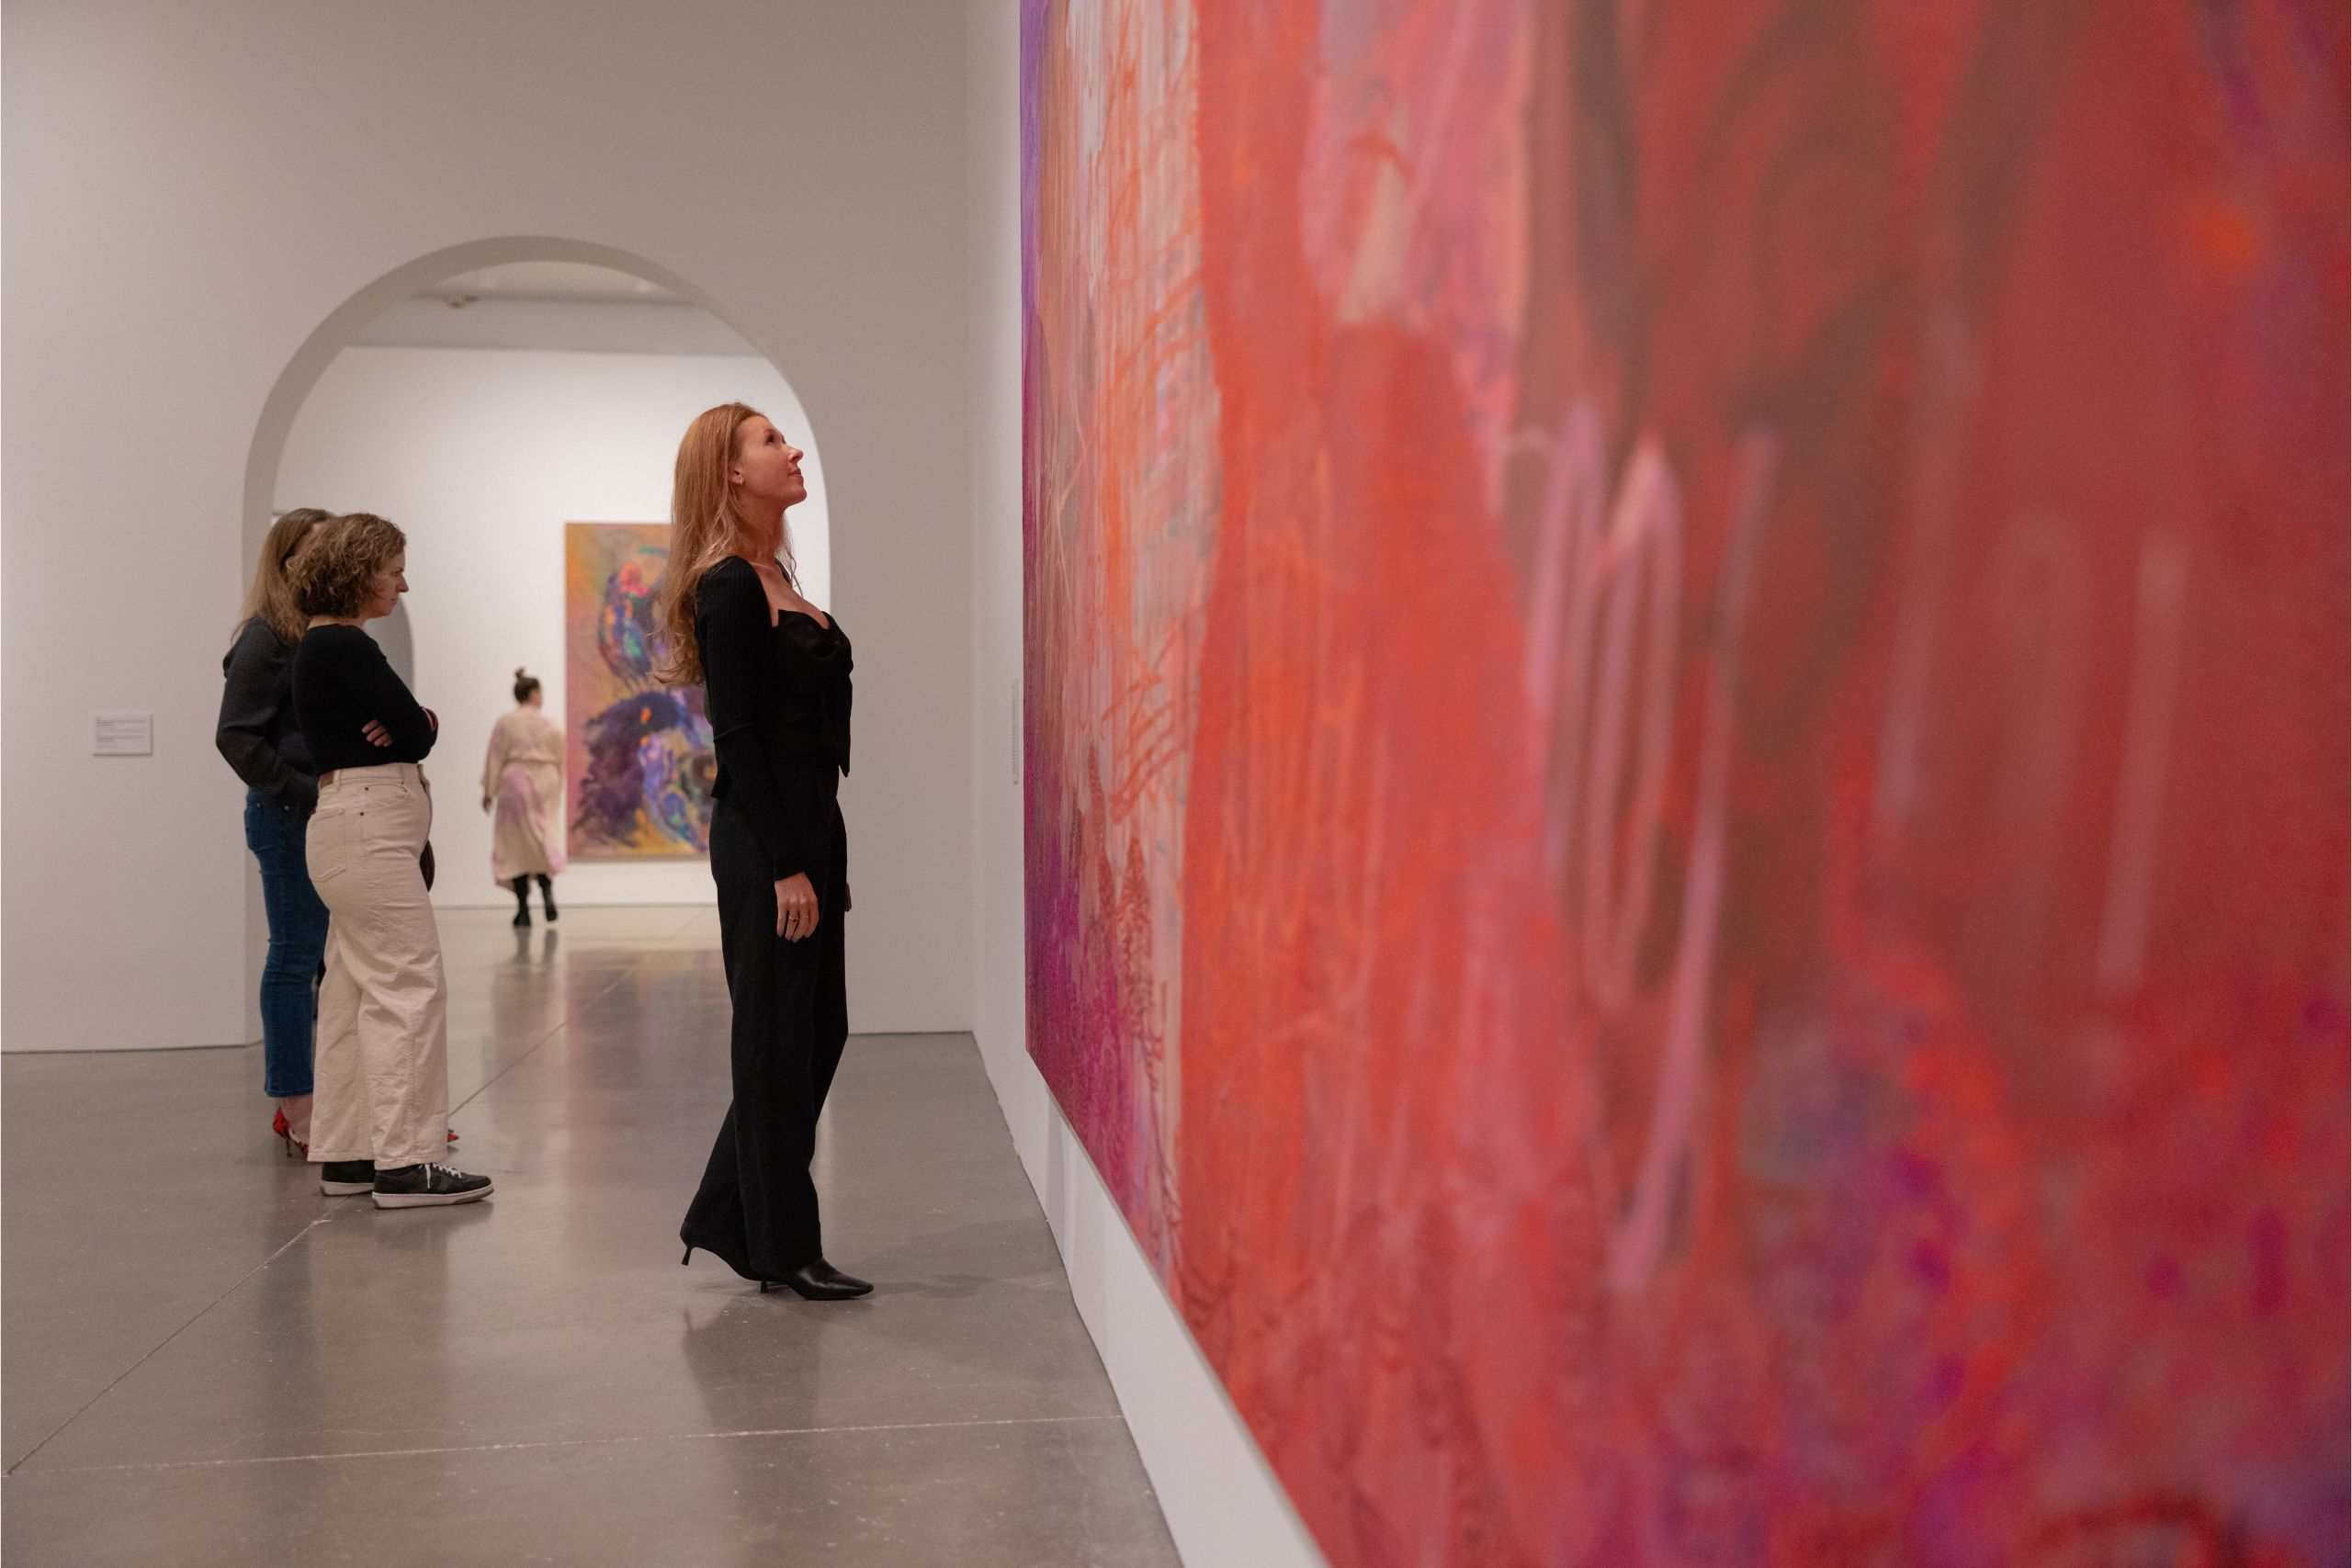 a woman in a black outfit looks up at a red and pink painting in a gallery space. behind her two women are in conversation